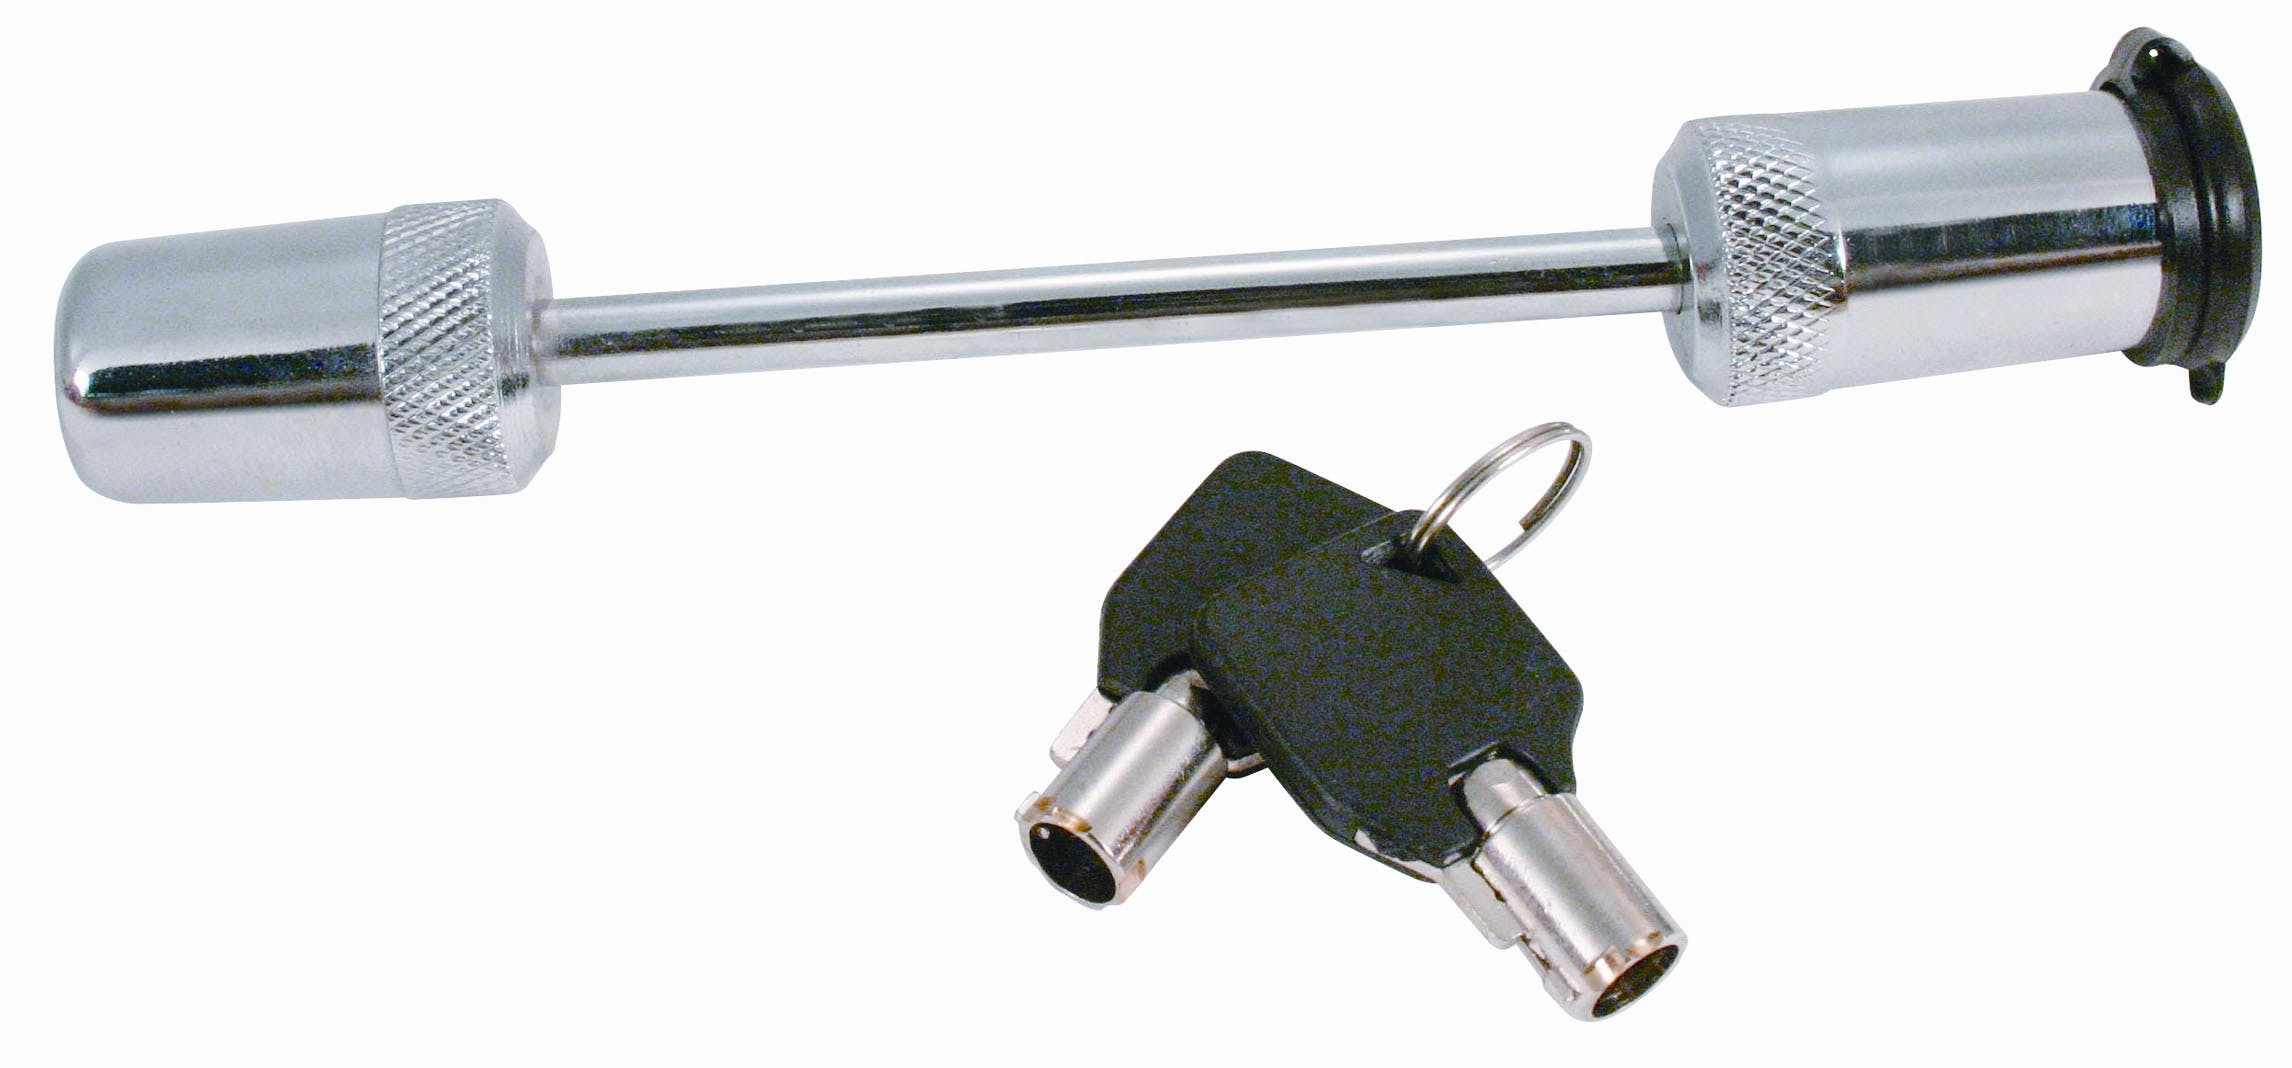 TRIMAX TC3 Coupler Lock (Fits Couplers W/ Up To 3-1/2 inch Span)